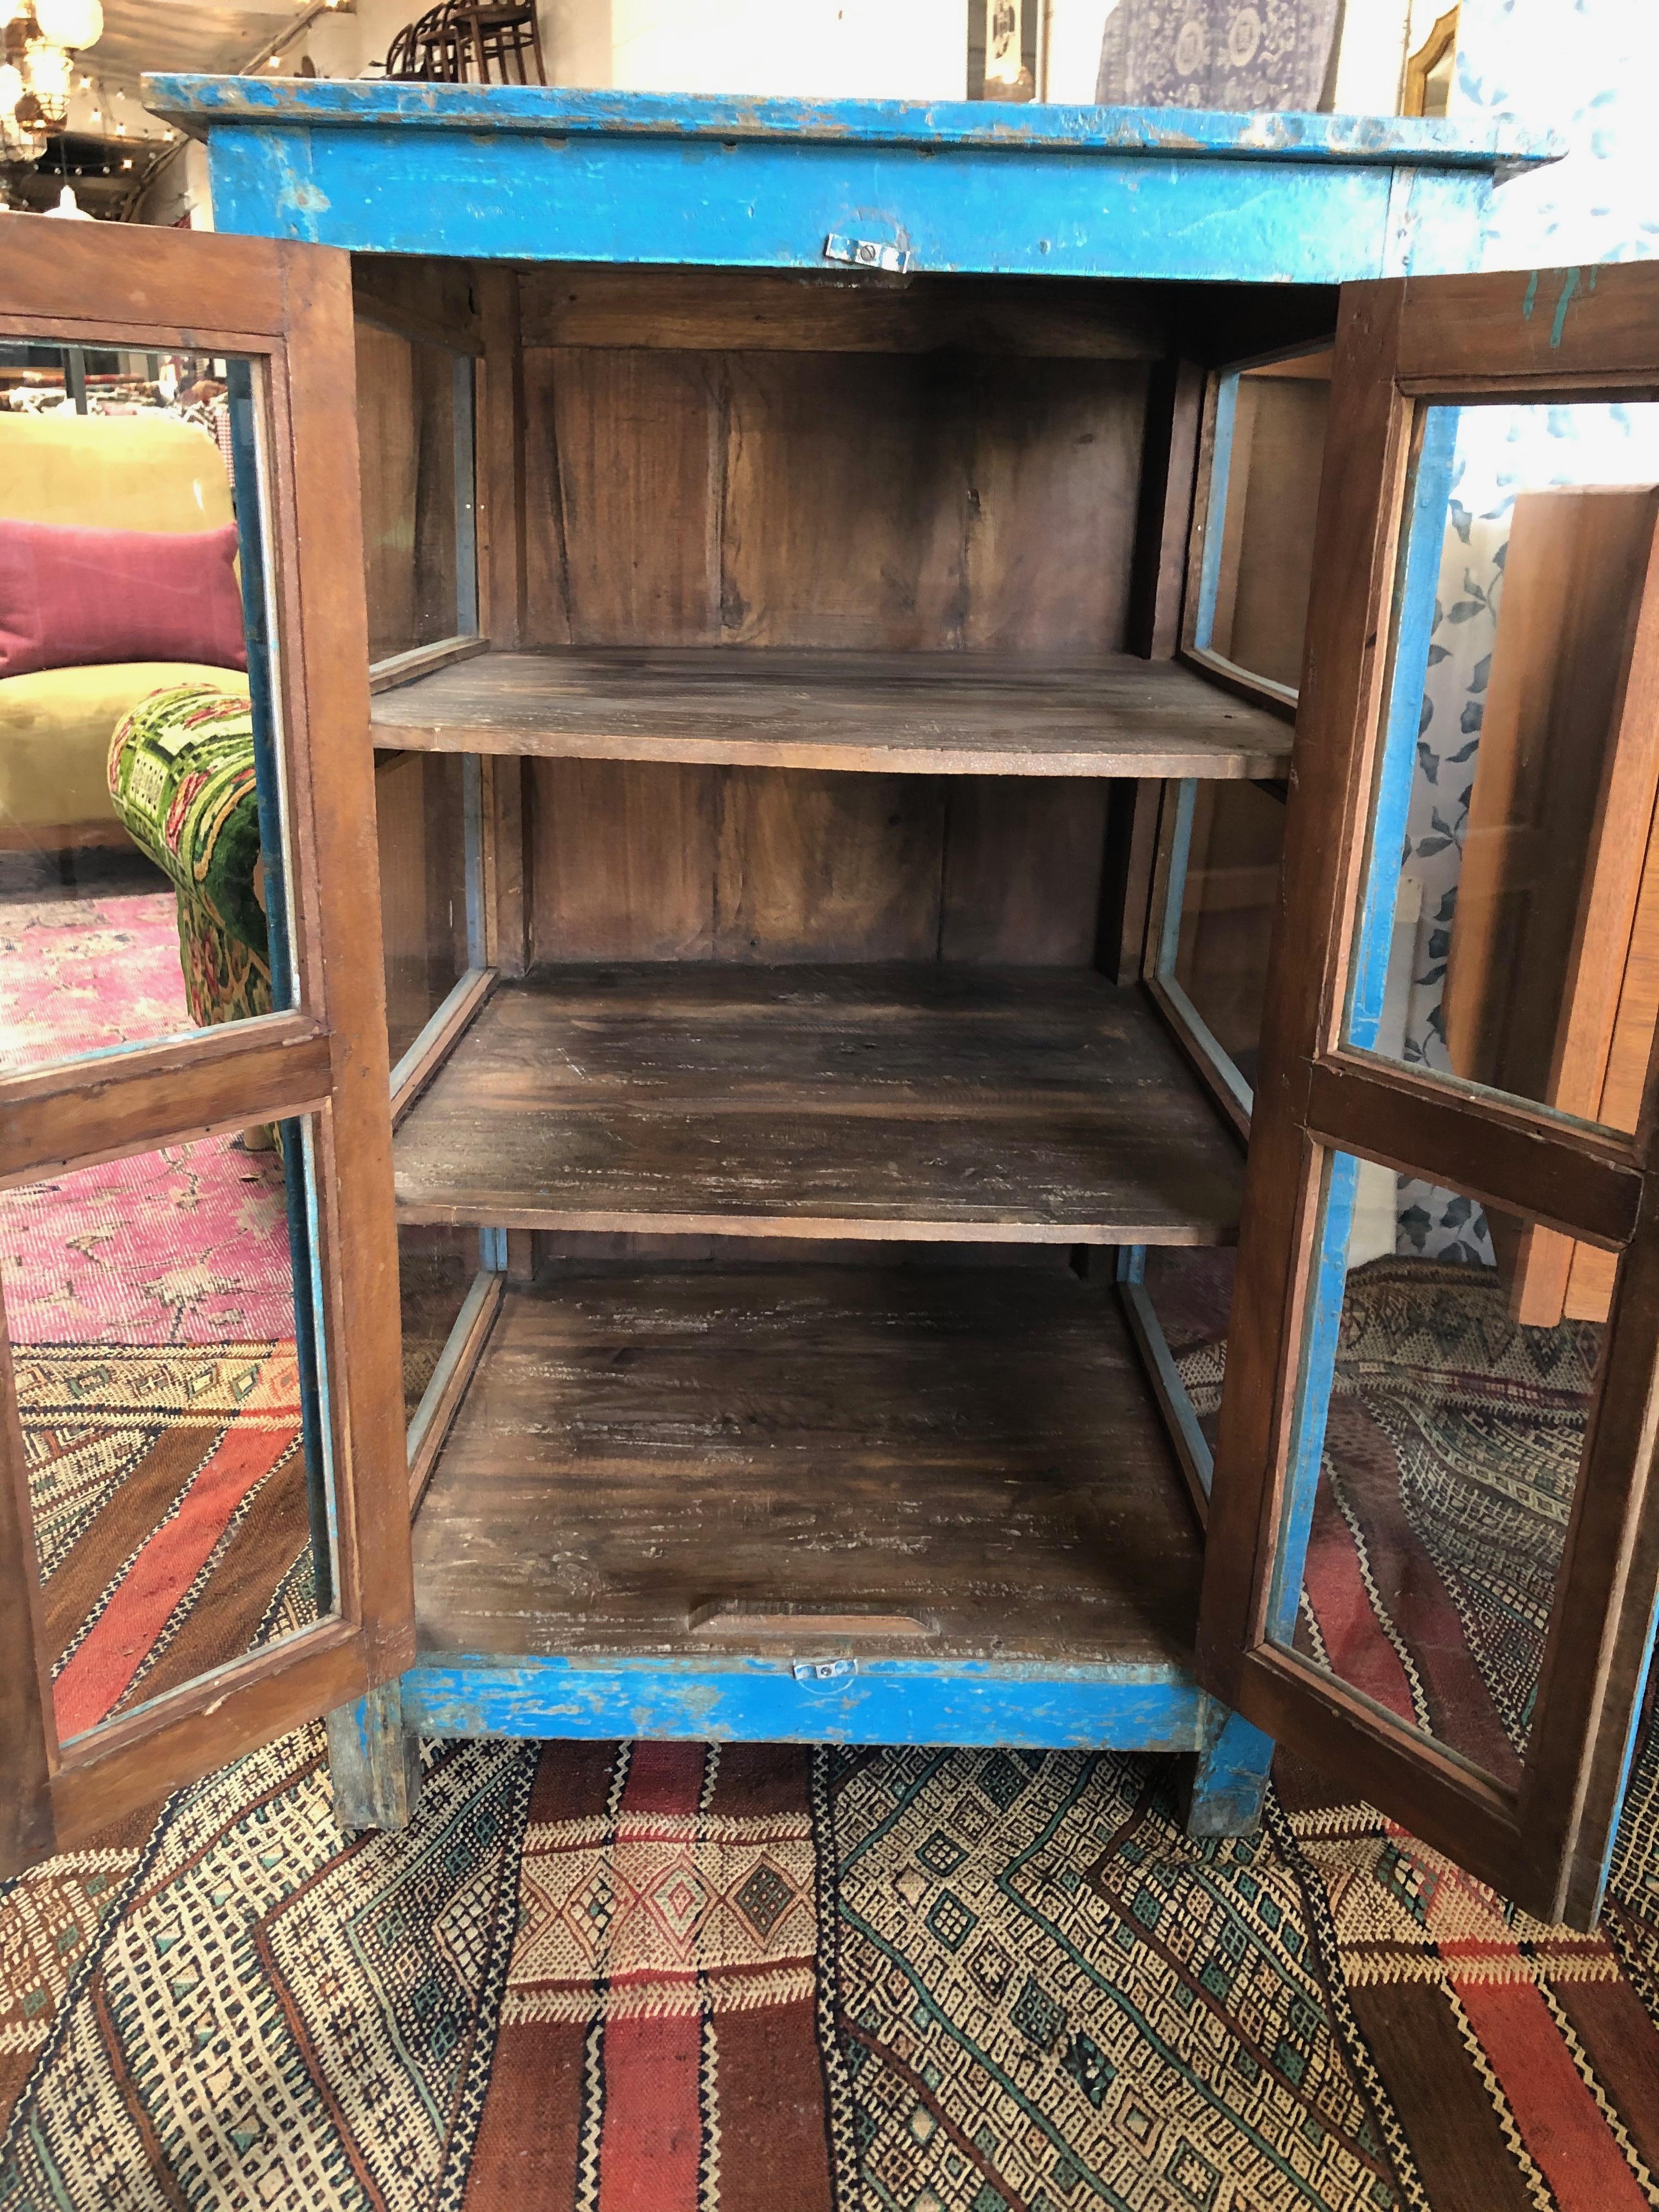 This vintage wooden hand painted blue cabinet features three shelving units and pull-open doors. Perfectly aged and a great addition to any rustic or farmhouse styled space.